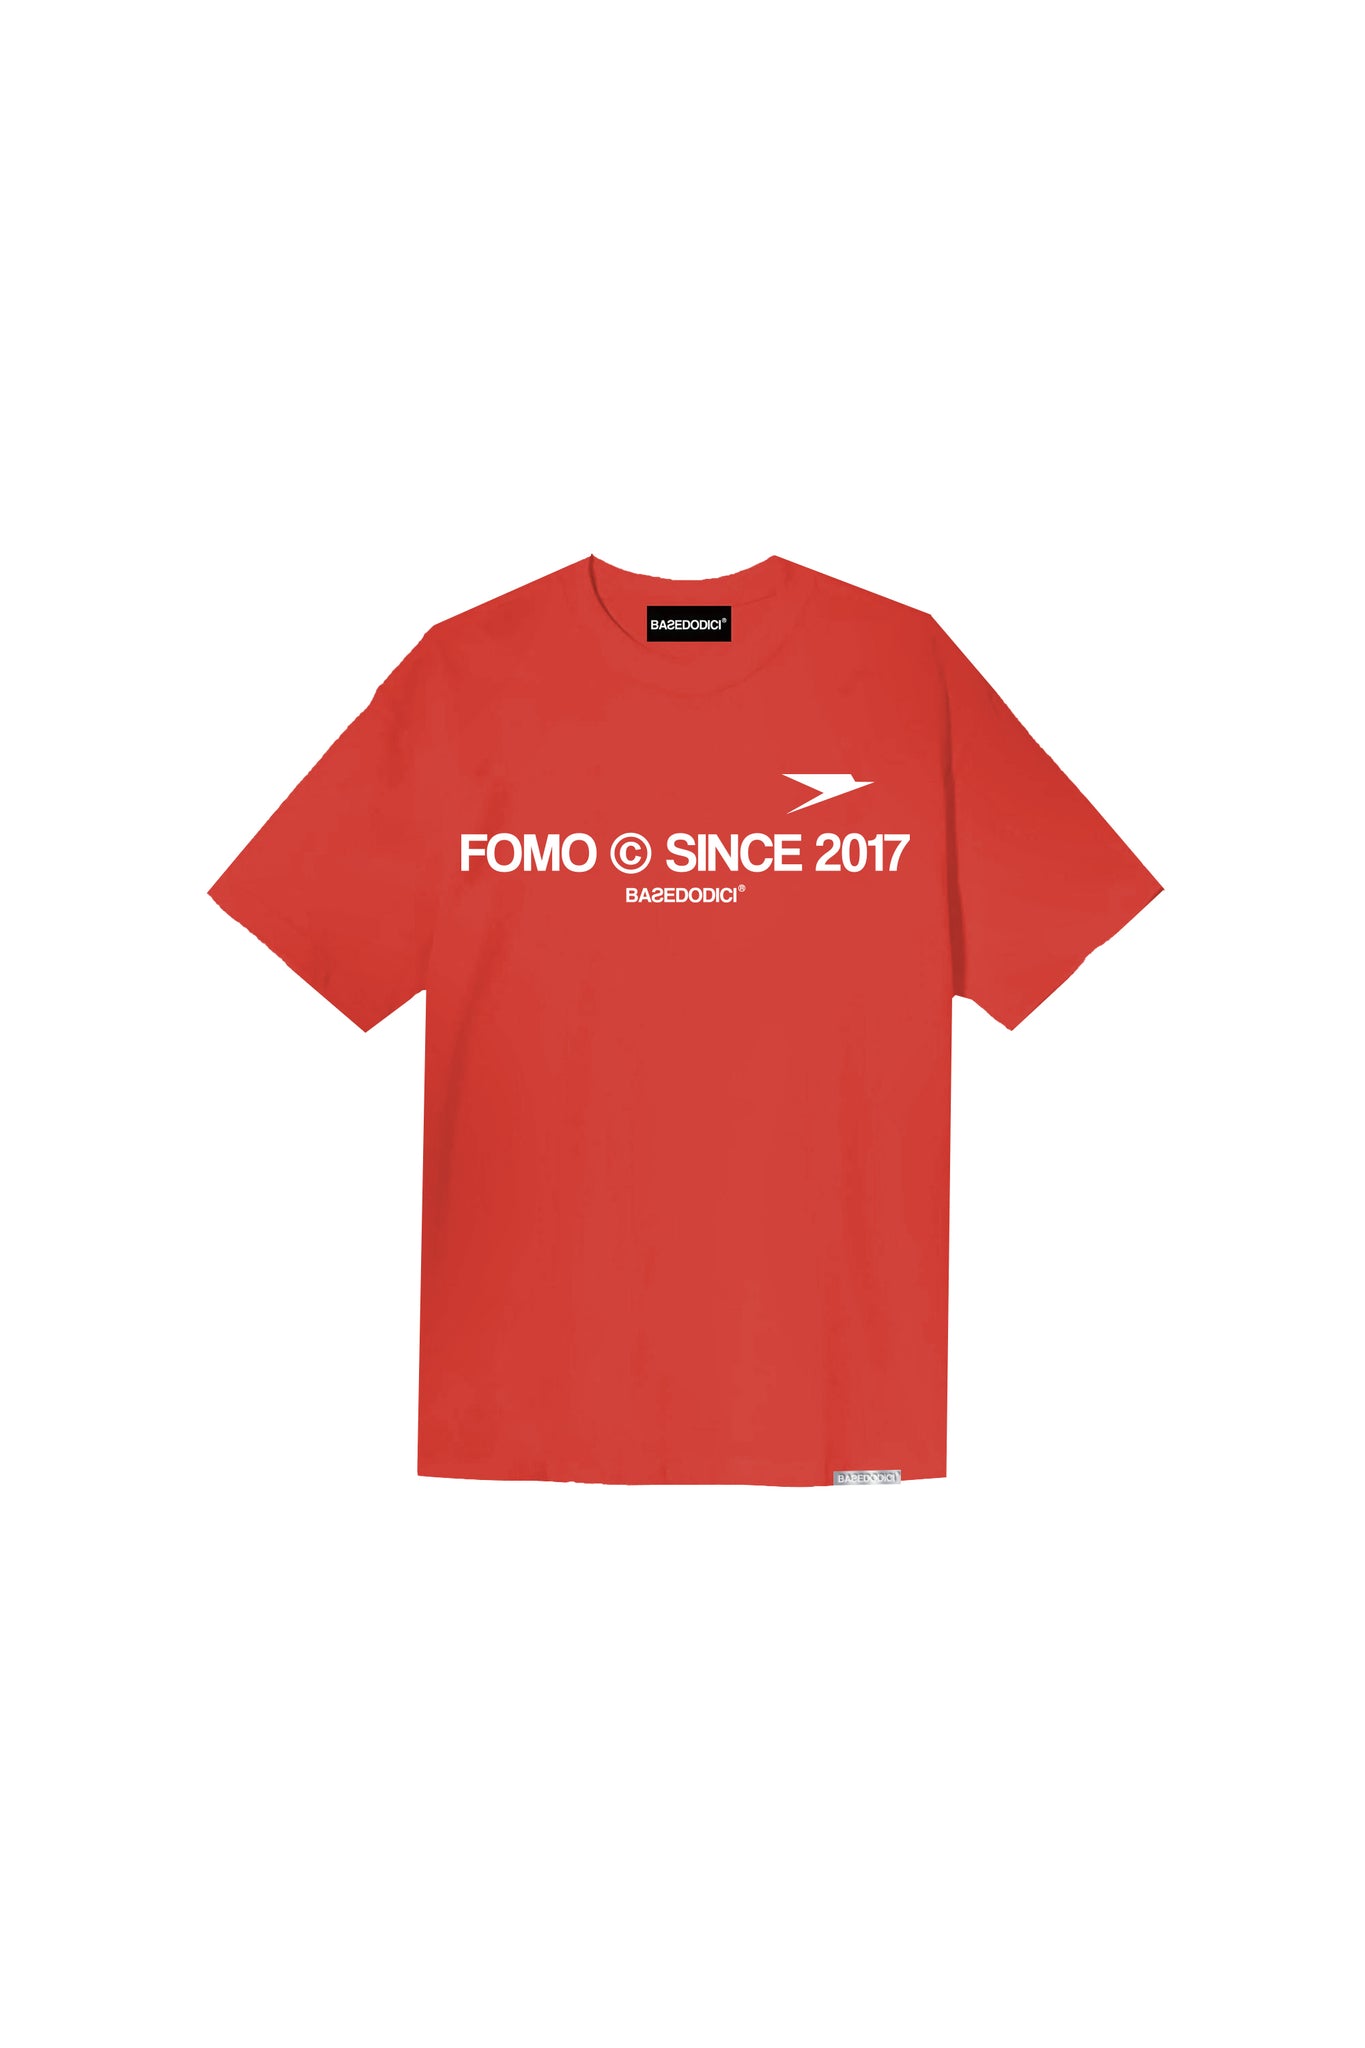 T-Shirt "FOMO" Since2017 Red